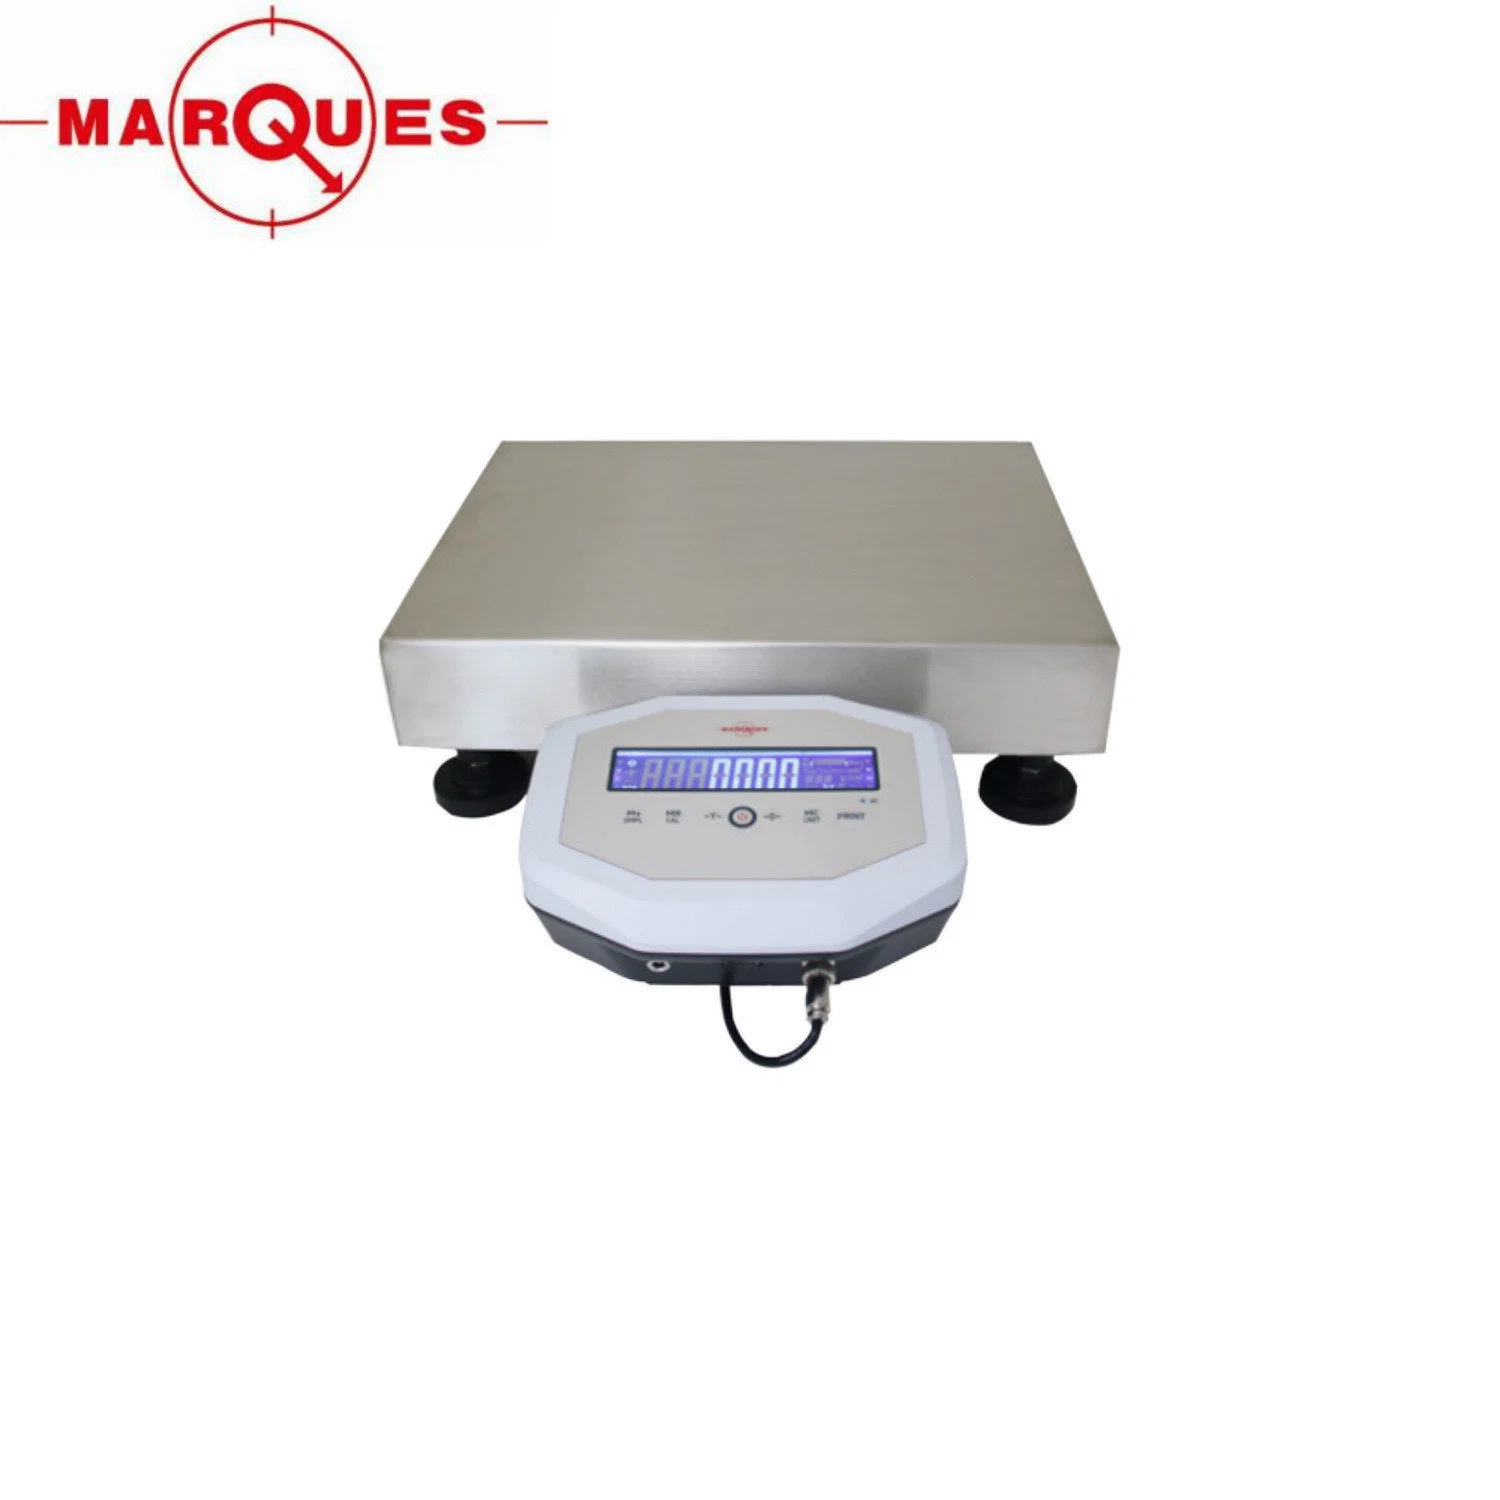 60kg Waterproof Stainless Steel Electronic Automatic Weighing Platform Scale with RS232 Port LCD Display IP65